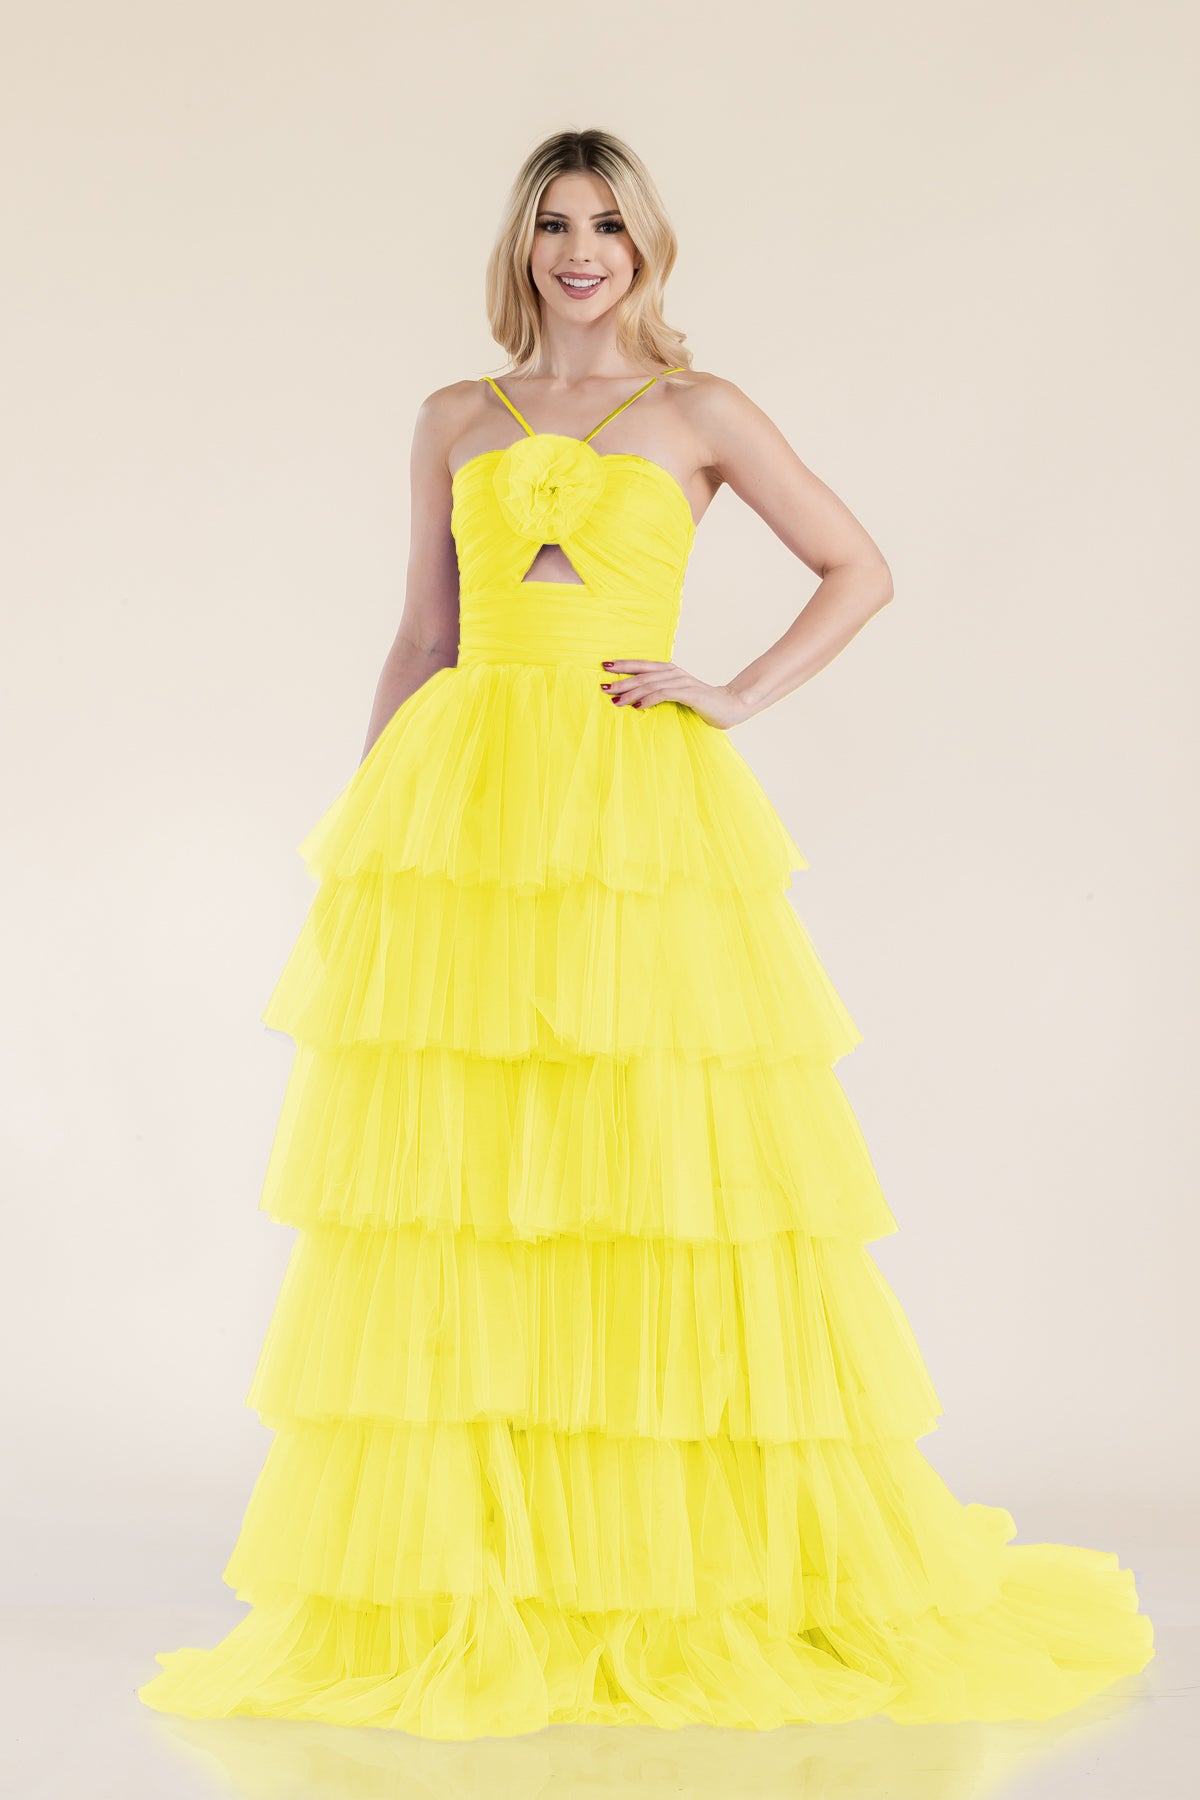 Prima Dress -SA502415 Halter Layered Tulle Ball Gown